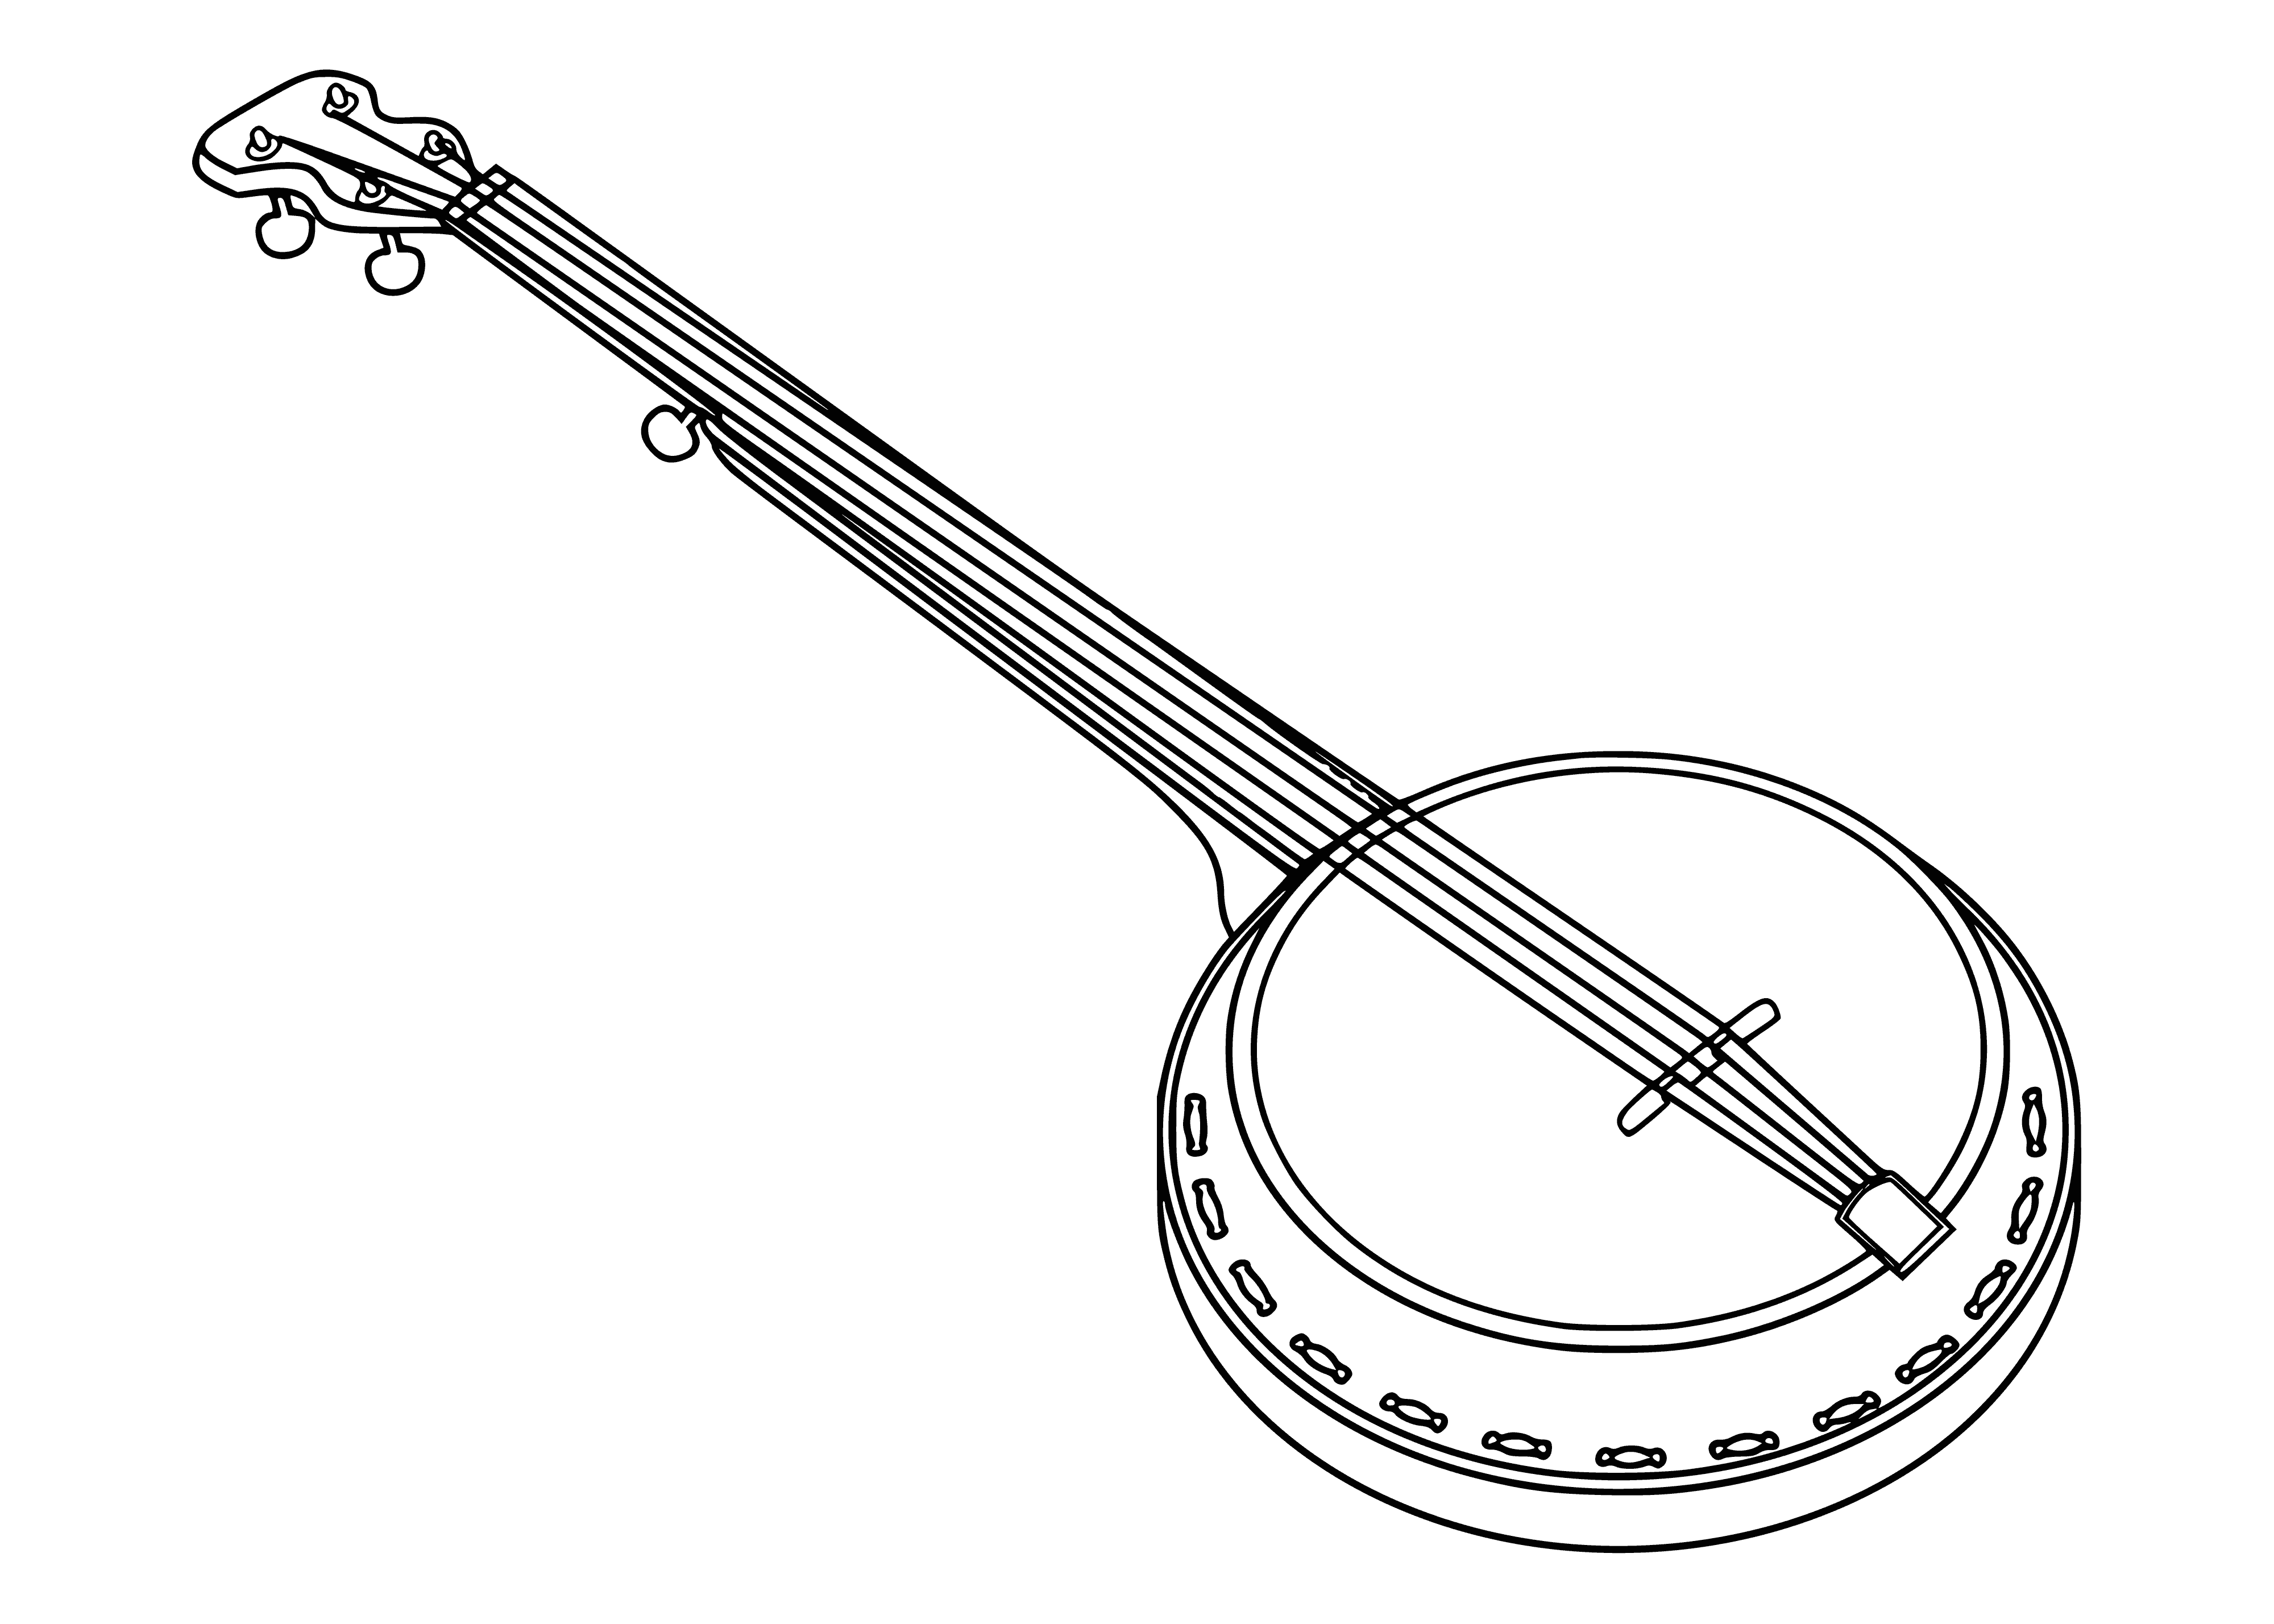 coloring page: Person playing banjo on stool. Neck and body of banjo are plucked by fingers. #StringedInstrument